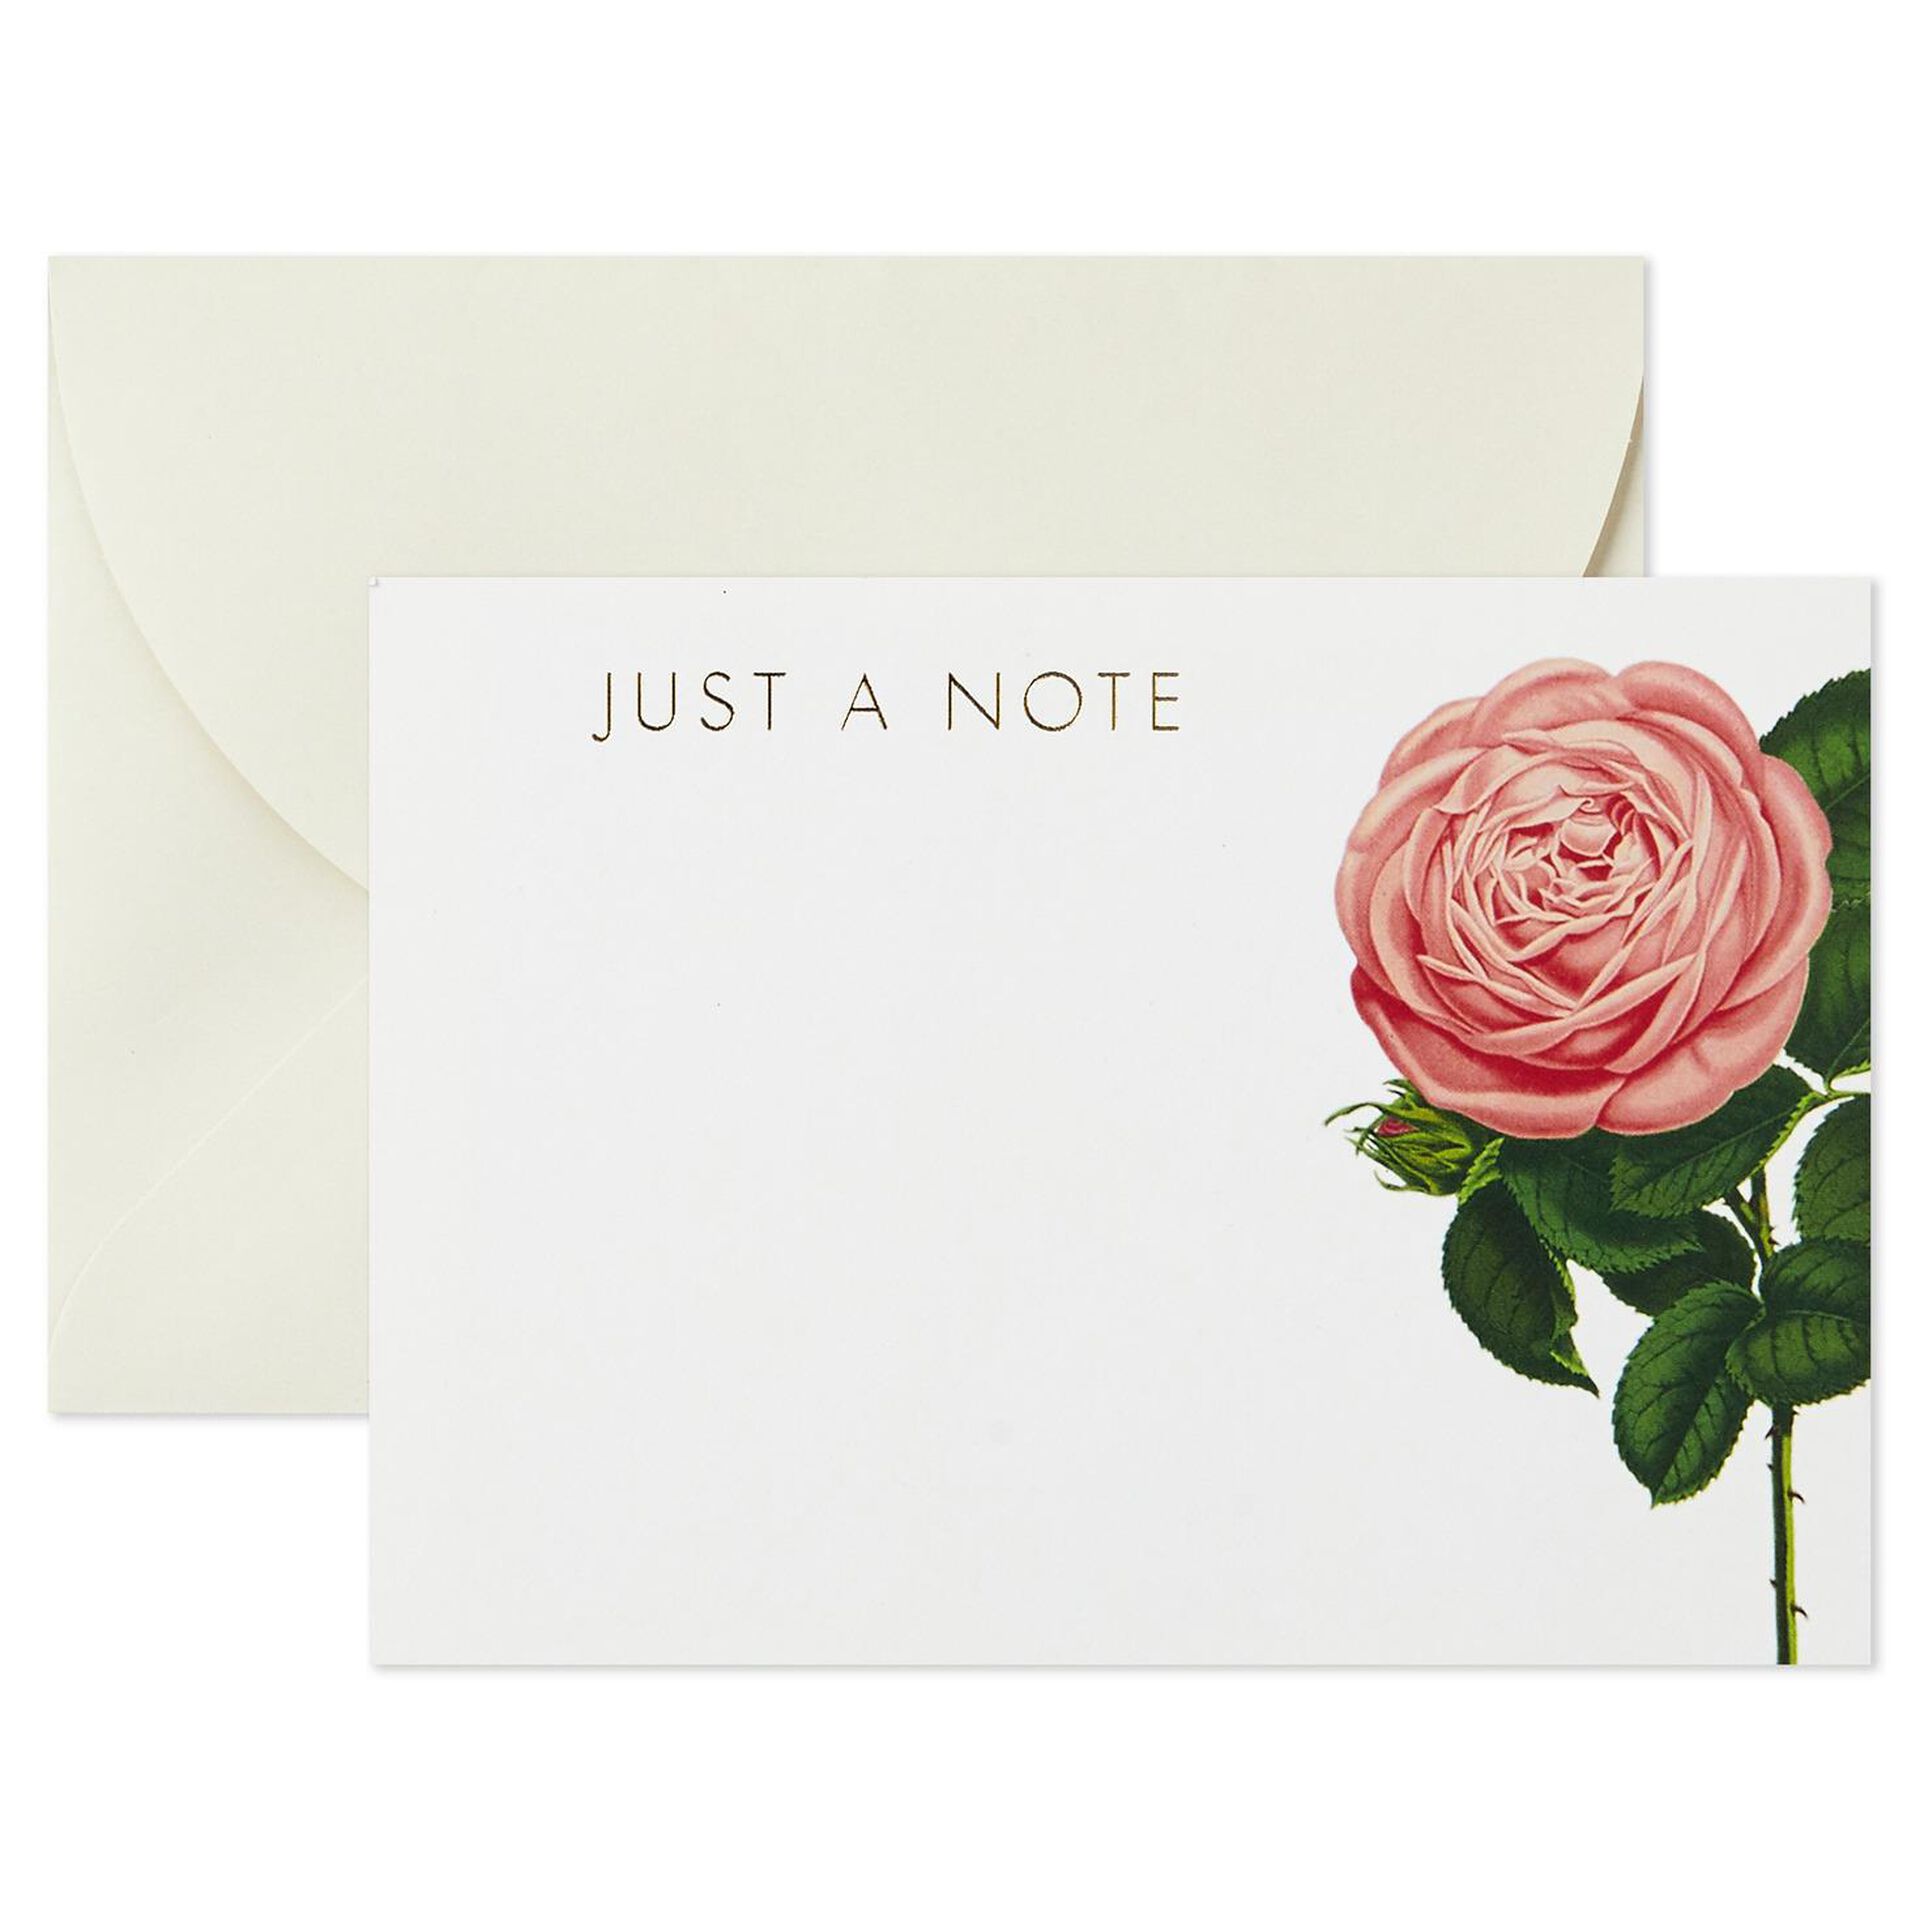 Cream-and-Pink-Roses-Blank-Flat-Note-Cards-With-Caddy-Box-of-40-root-1199SOM1312_SOM1312_03.jpg_Source_Image